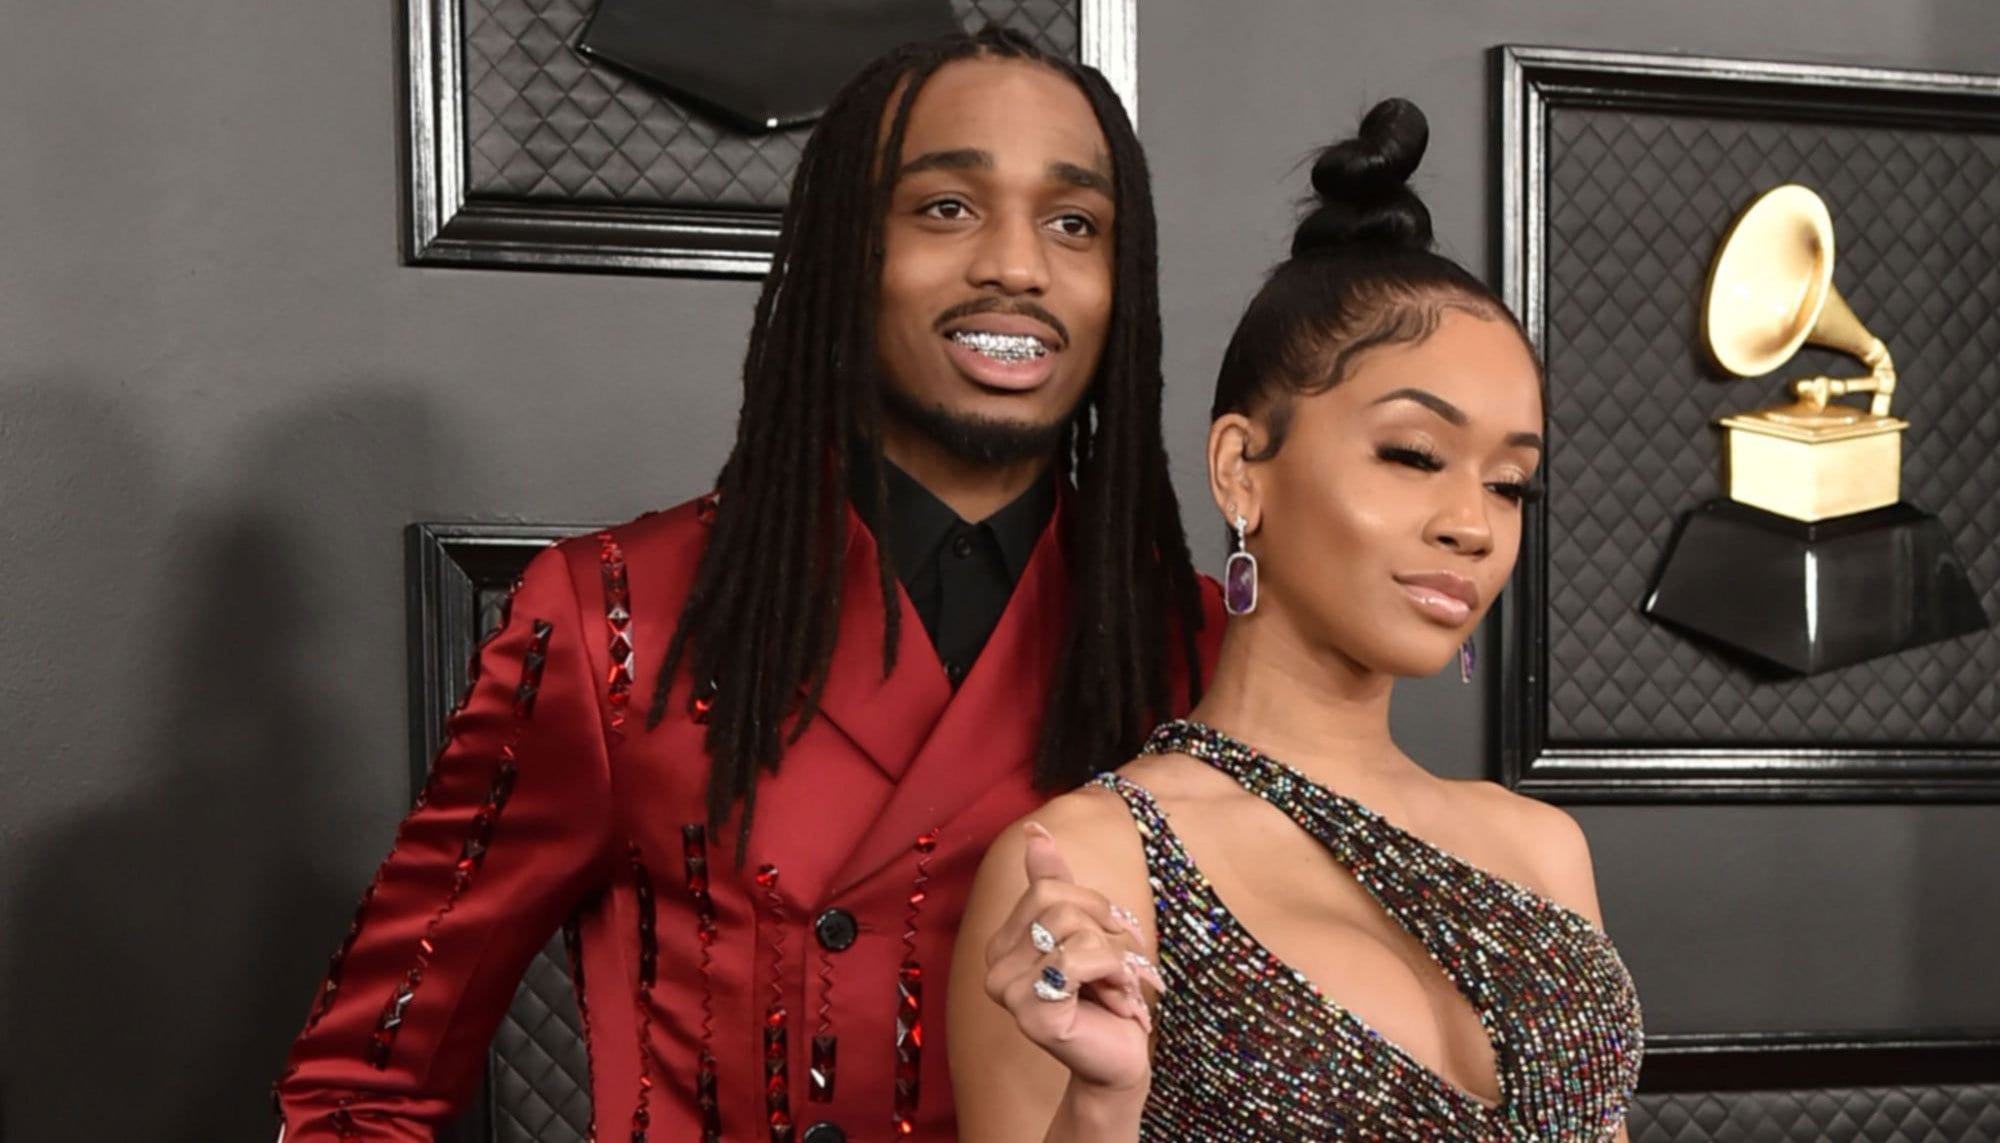 Saweetie and Quavo tried to cover up the elevator incident